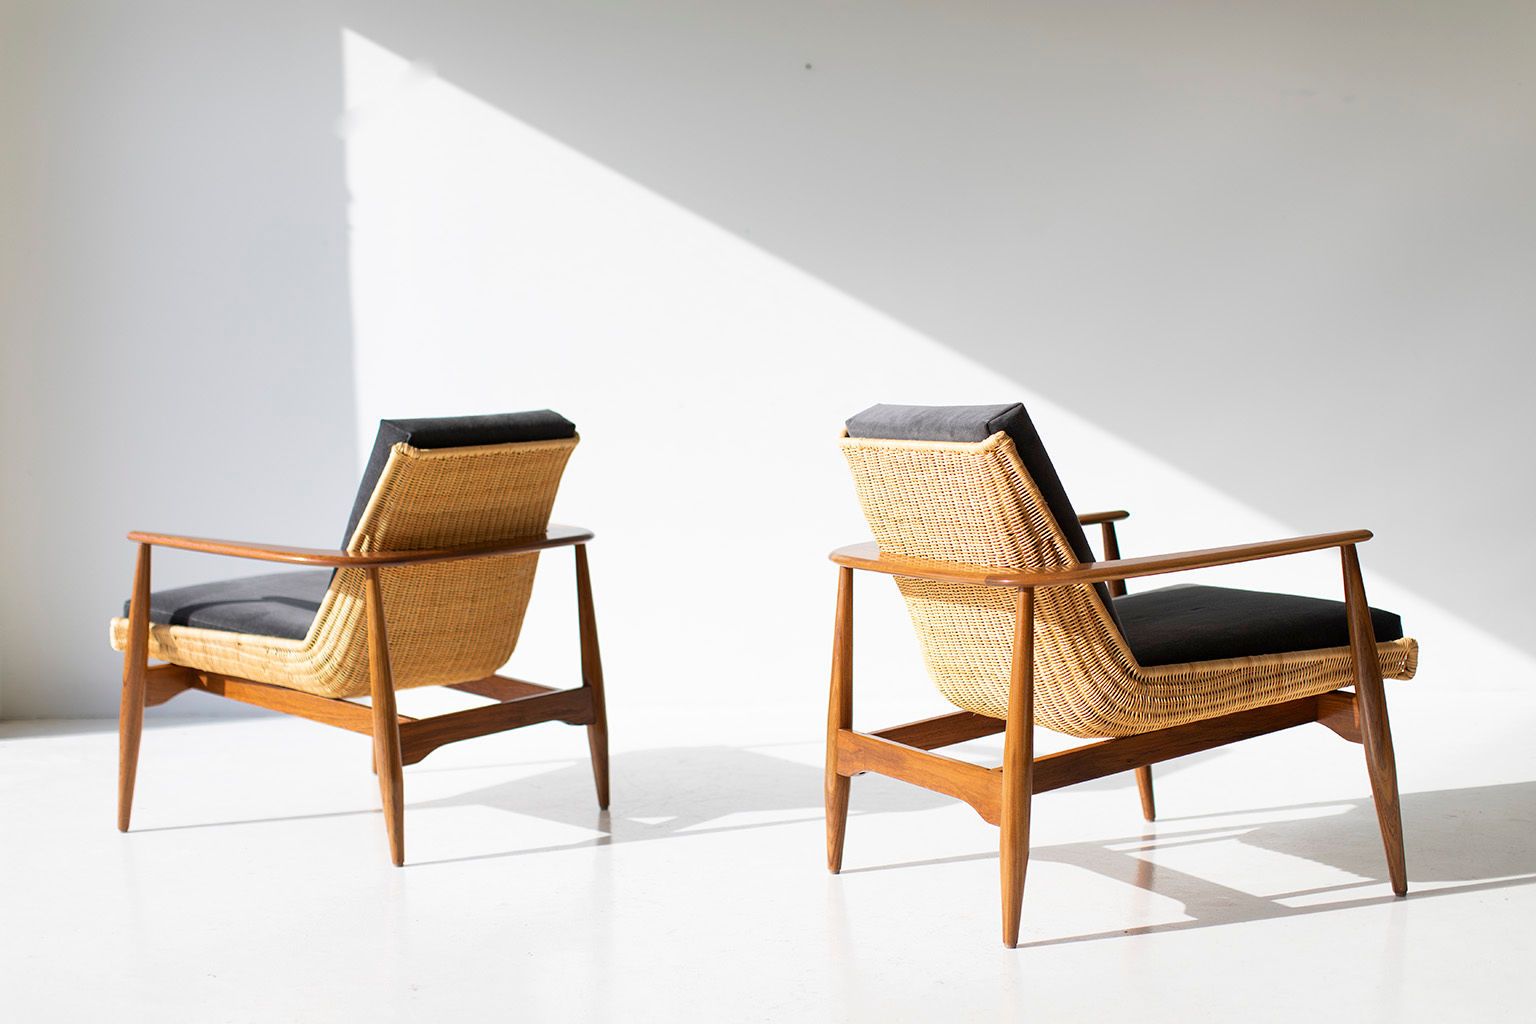 Lawrence-Peabody-Wicker-Lounge-Chairs-11